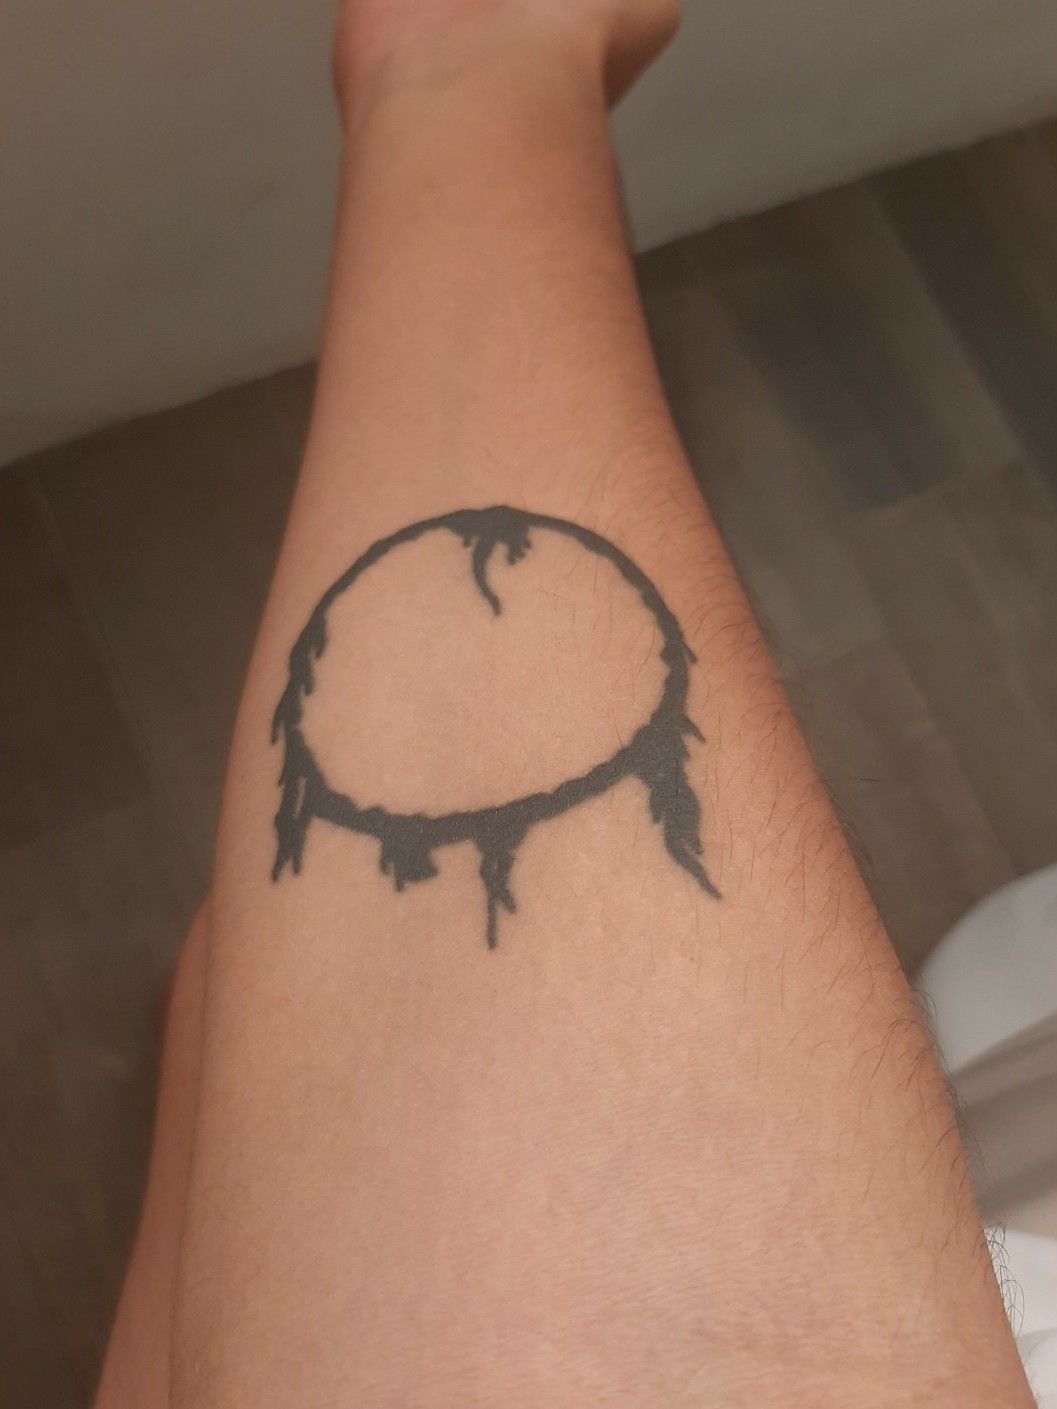 Tattoo uploaded by Marc Arenyes Casals  Dark Sign from the Dark Souls  videogame saga  Tattoodo